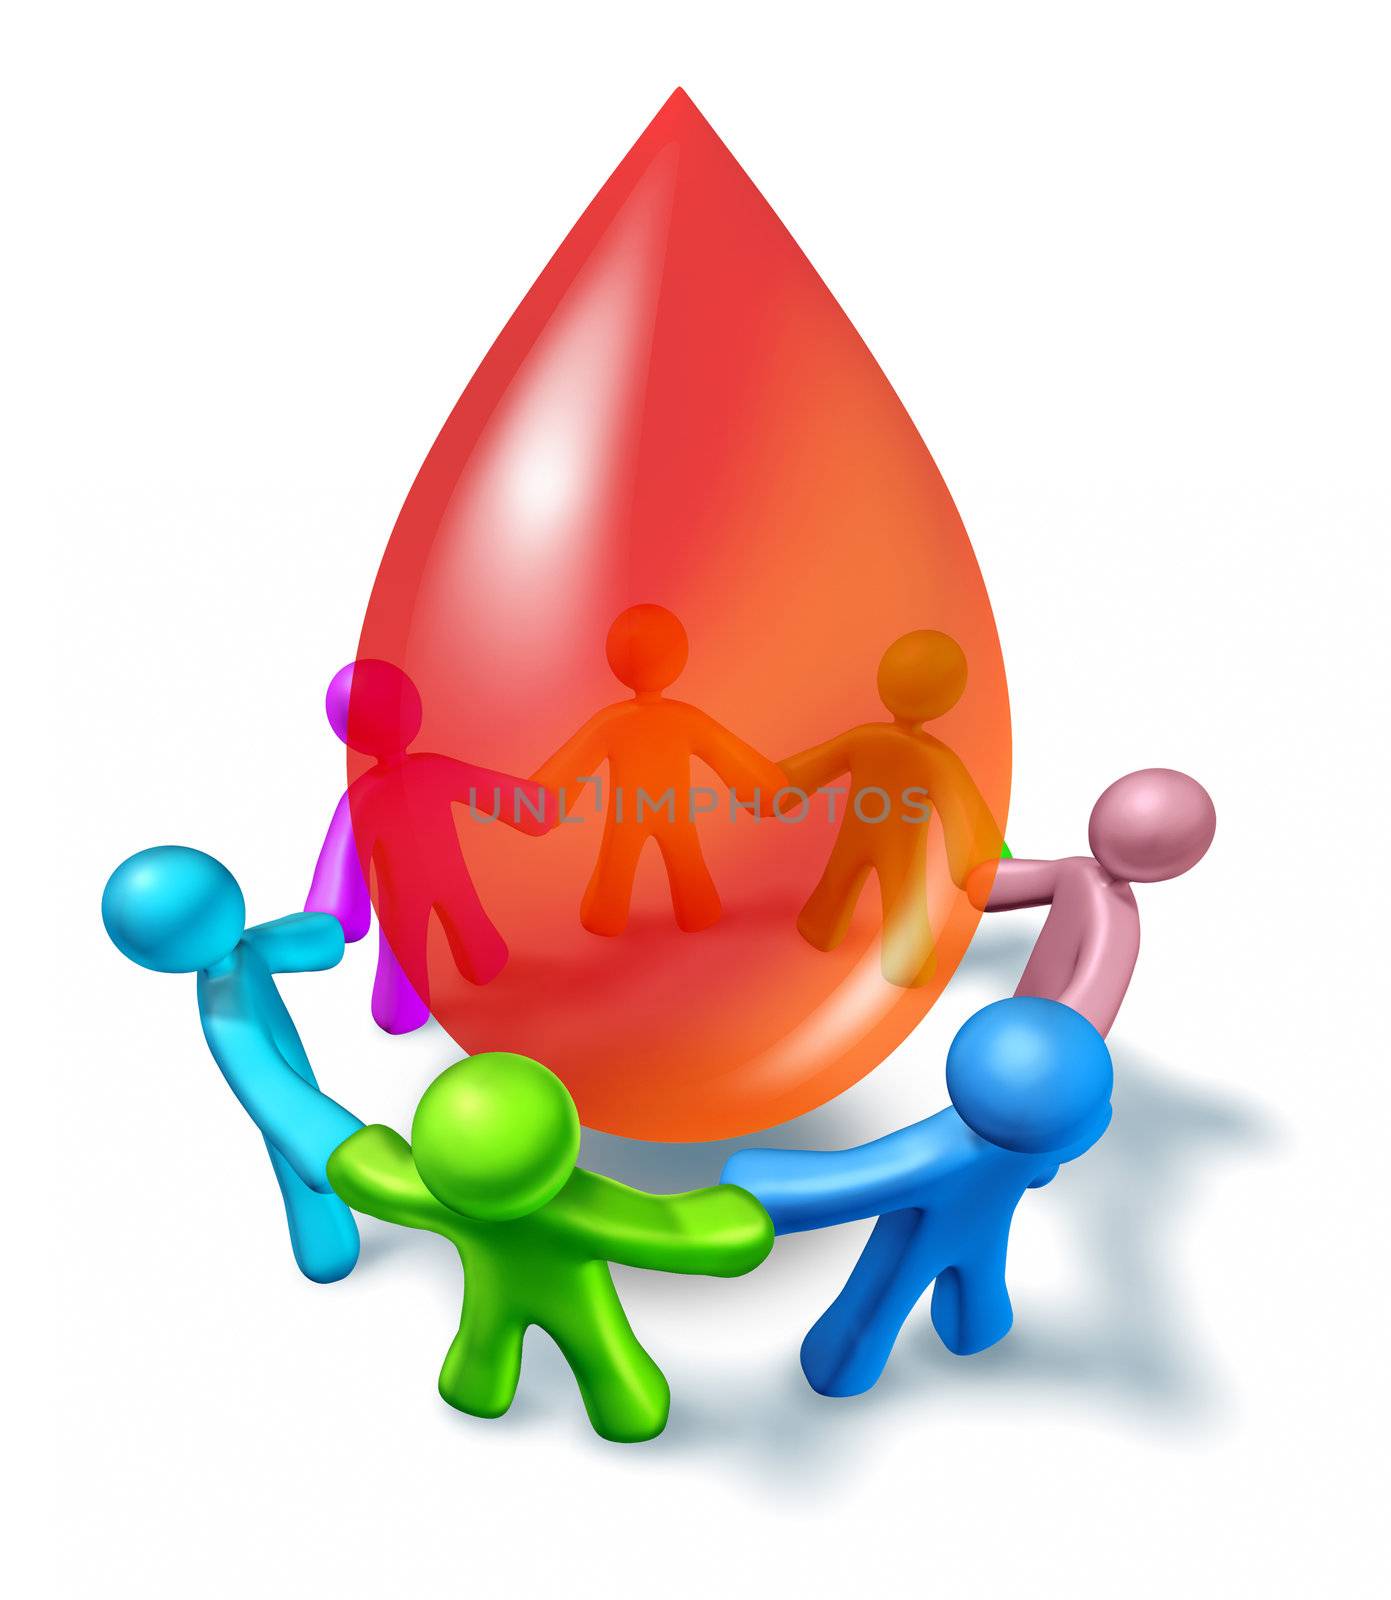 Blood Donation Community by brightsource